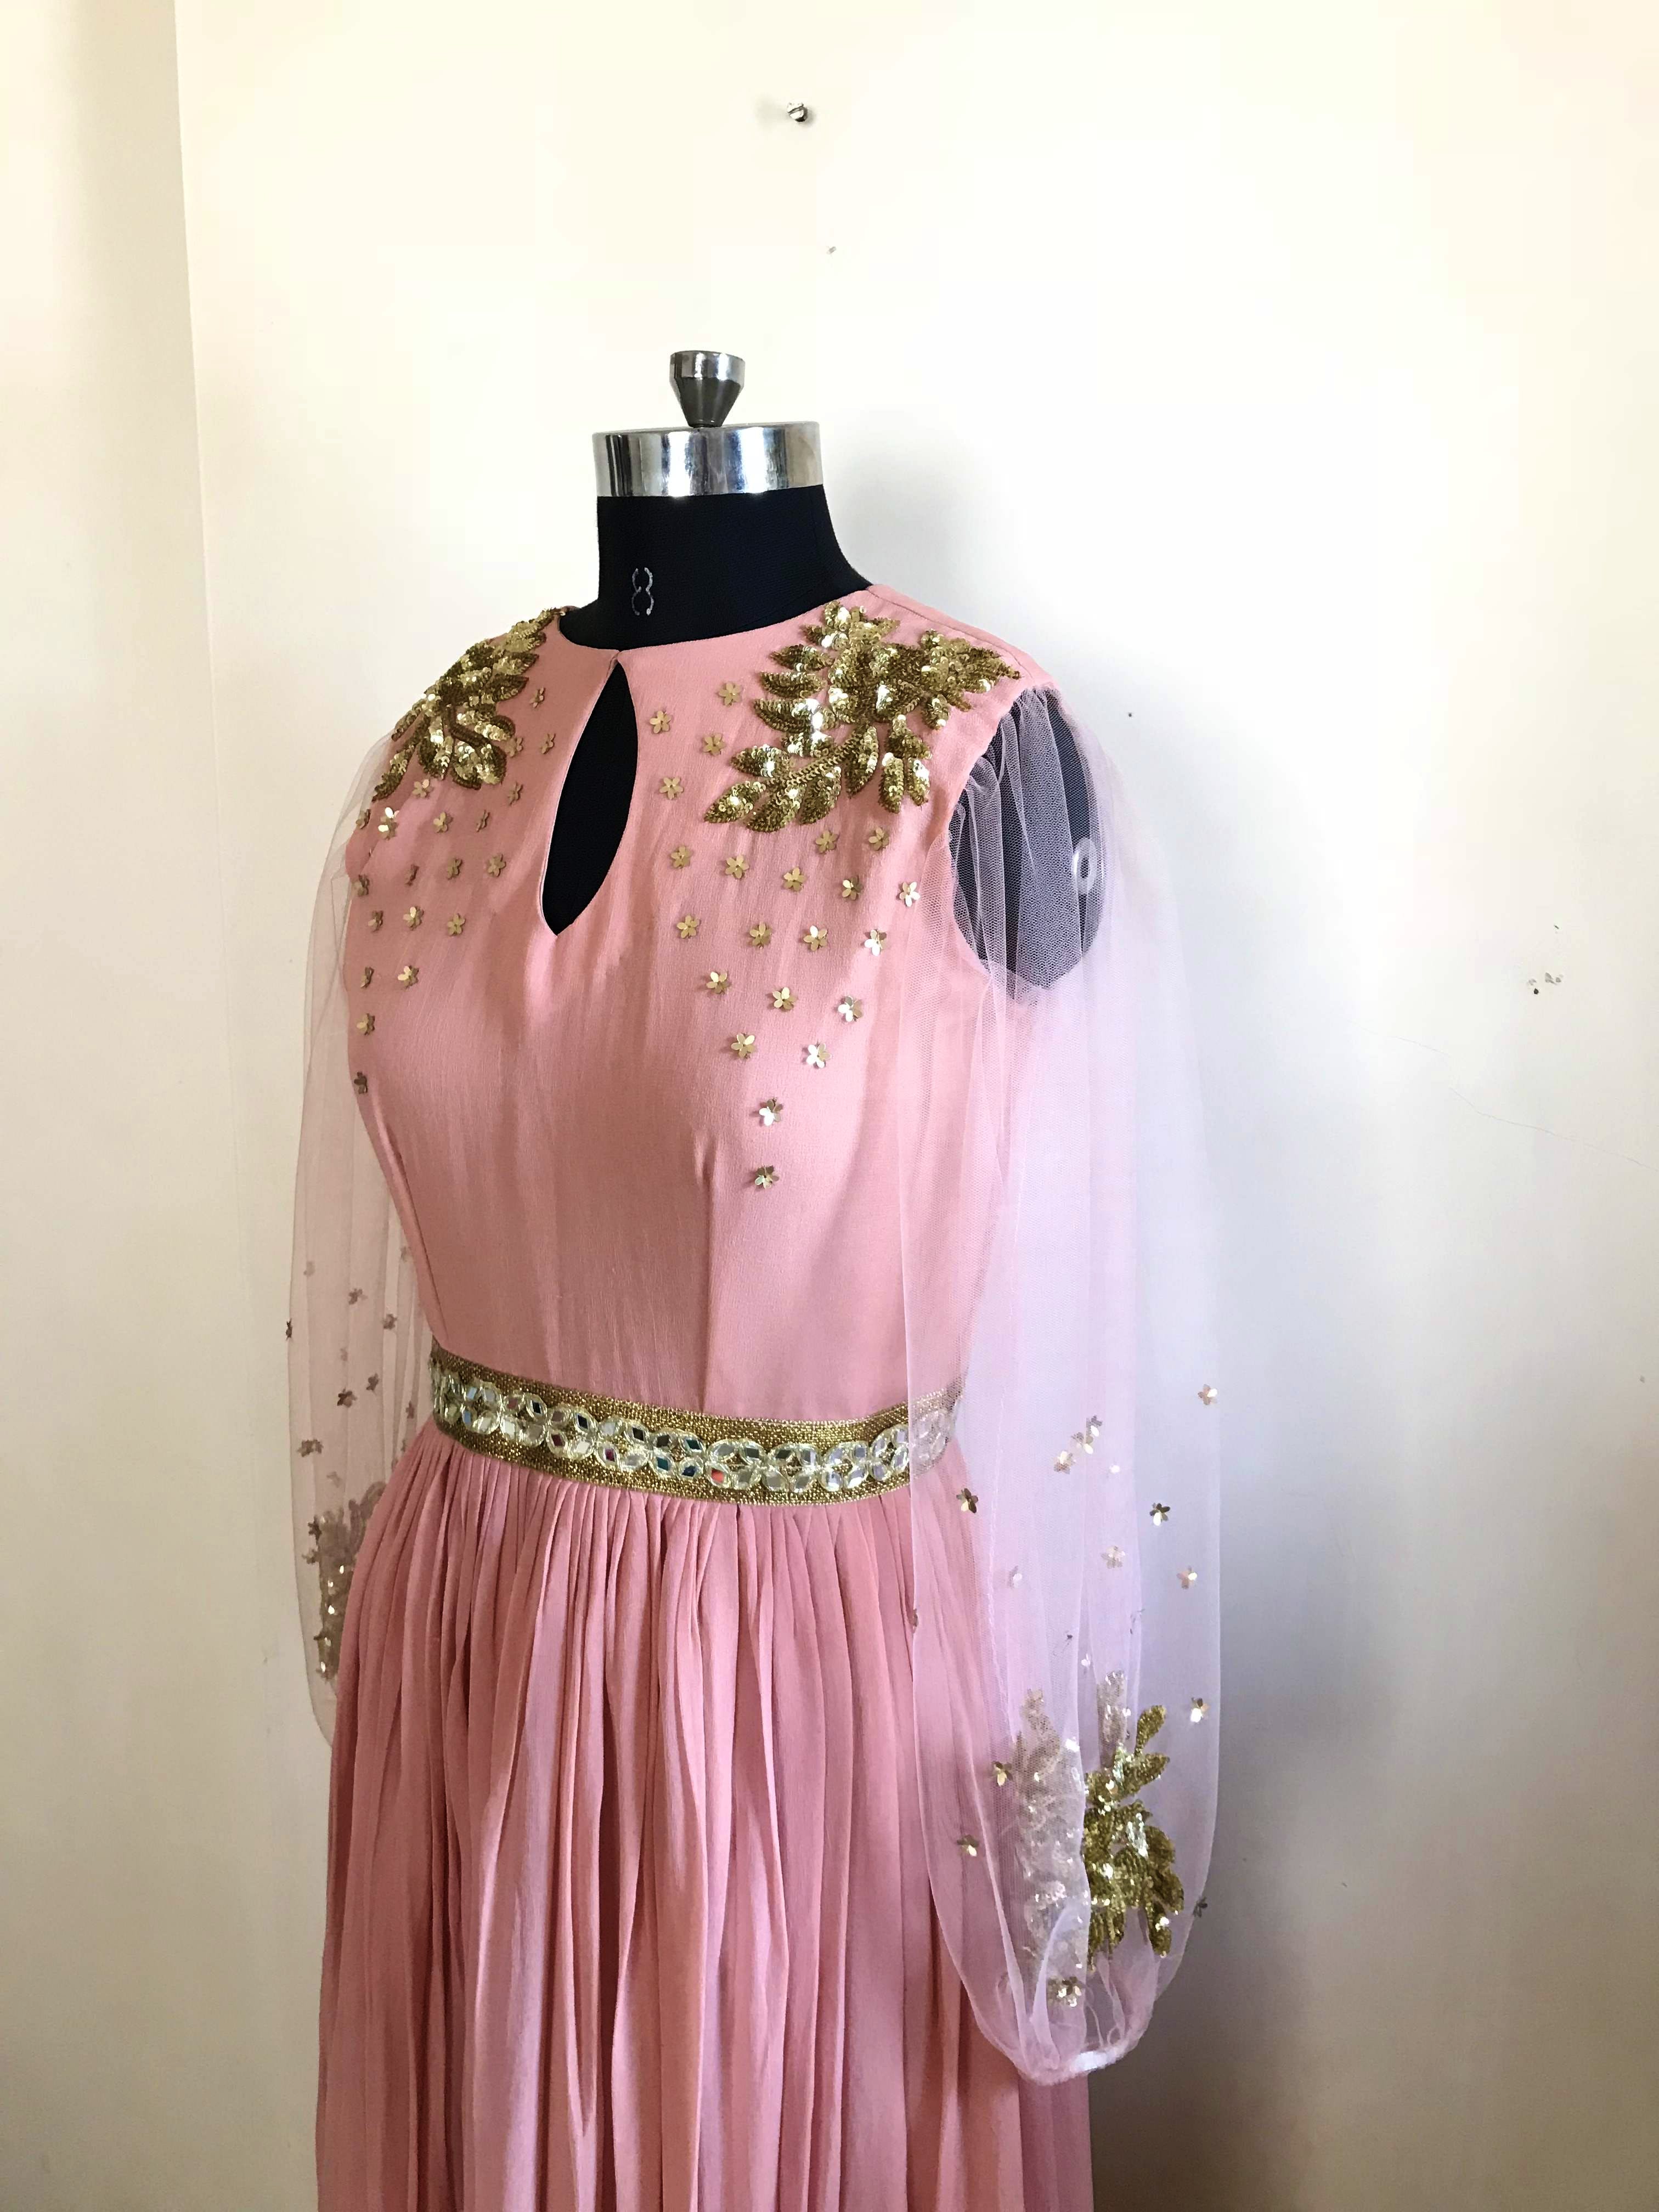 Clothing,Pink,Dress,Shoulder,Peach,Formal wear,Day dress,Cocktail dress,Outerwear,Joint